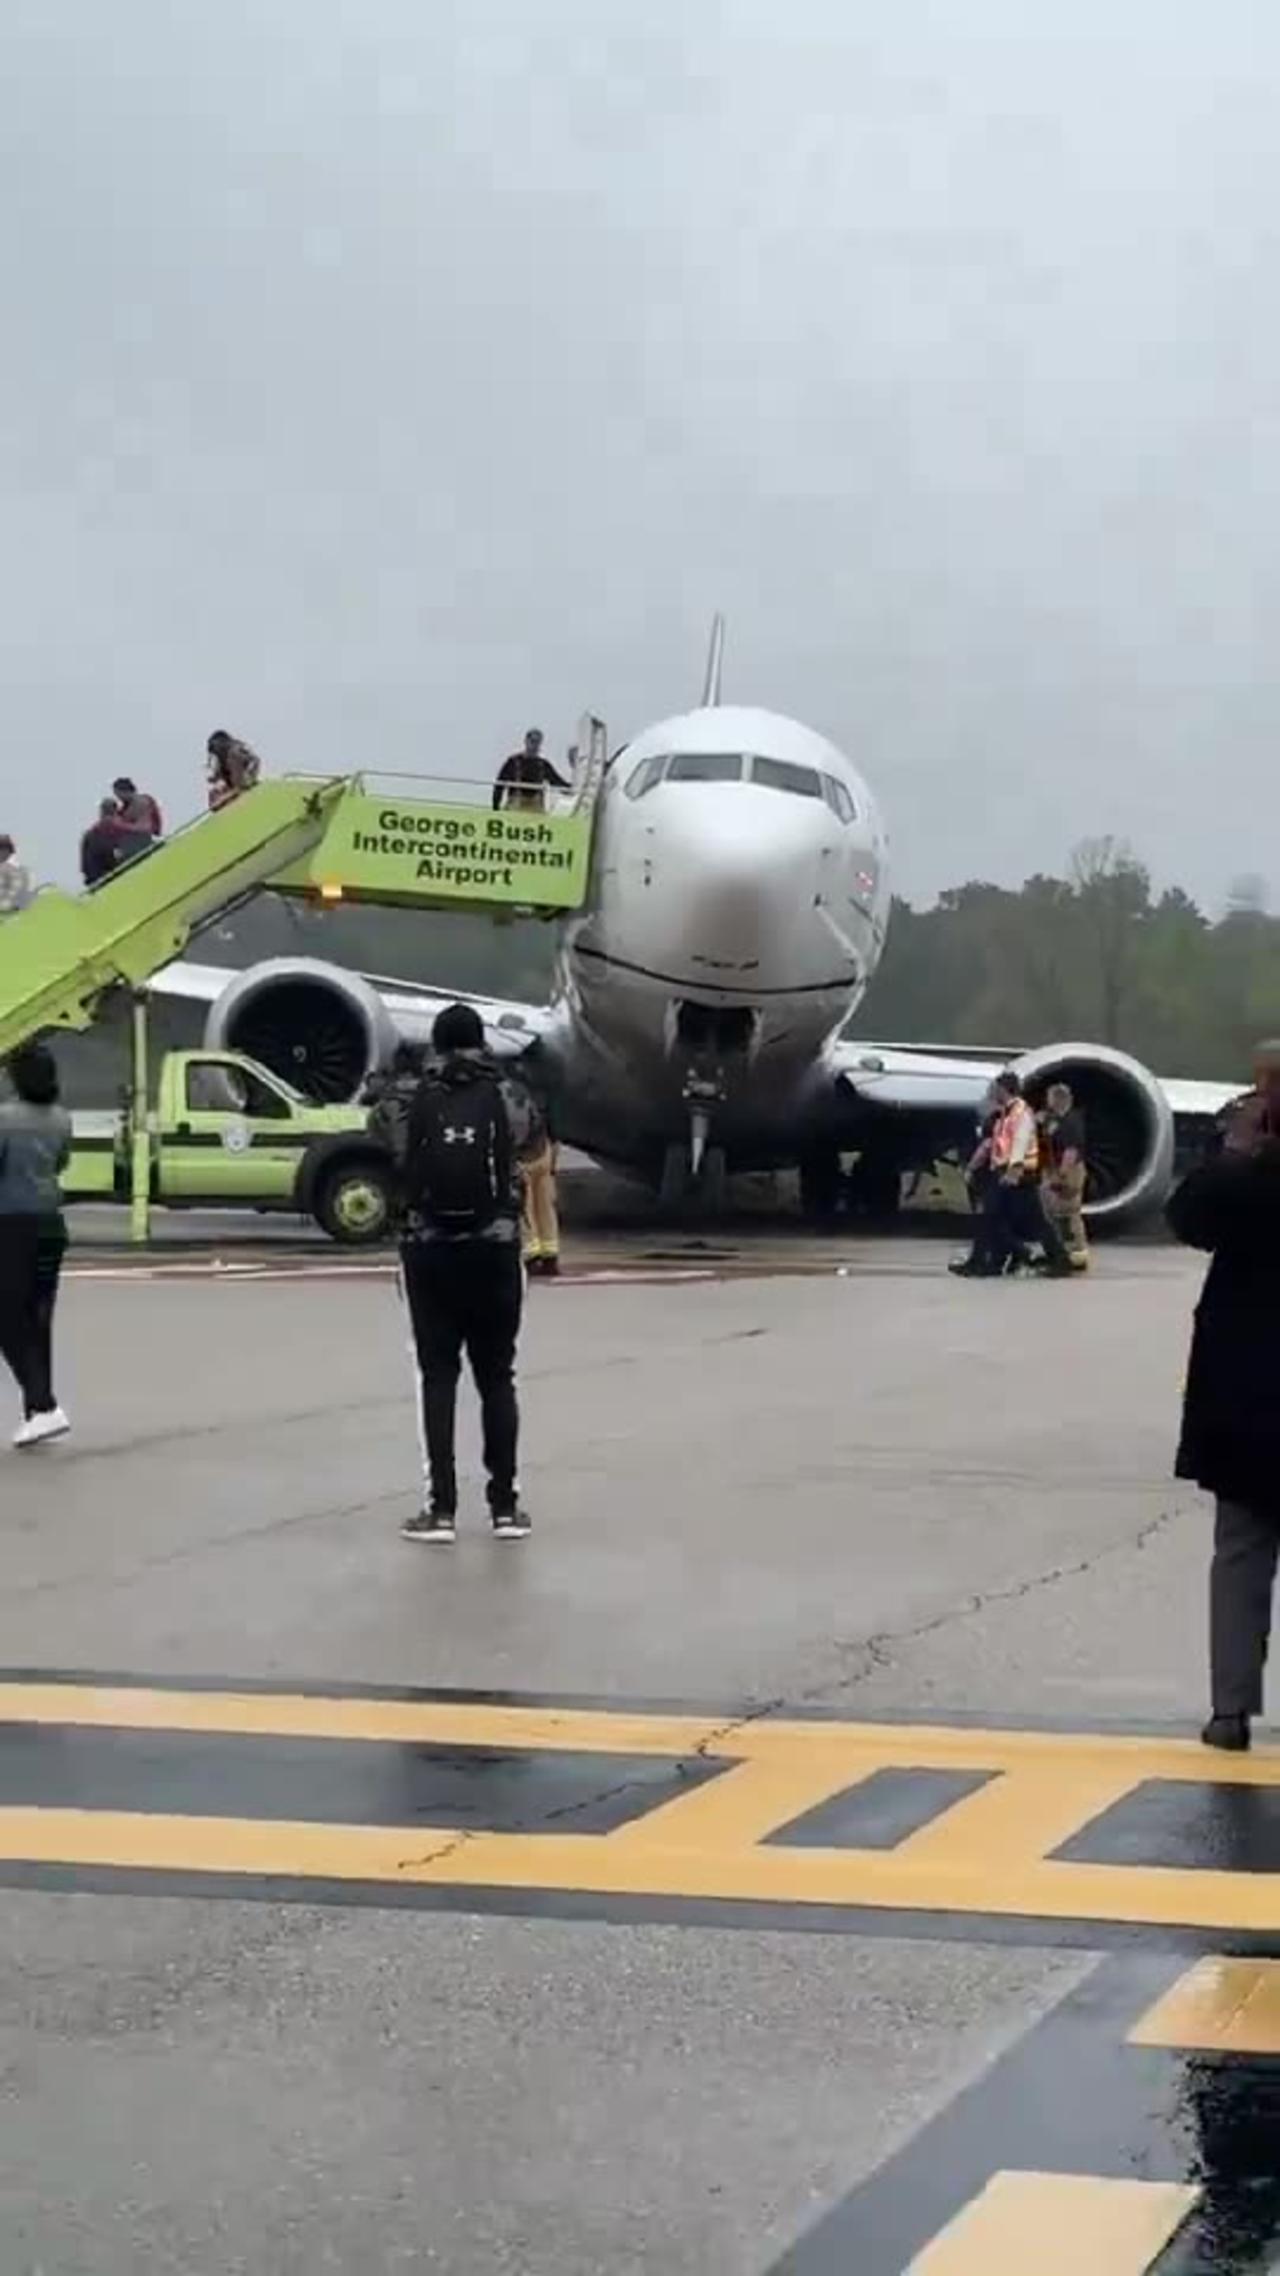 JUST IN - United Boeing 737 MAX suffers gear collapse after landing in Houston,